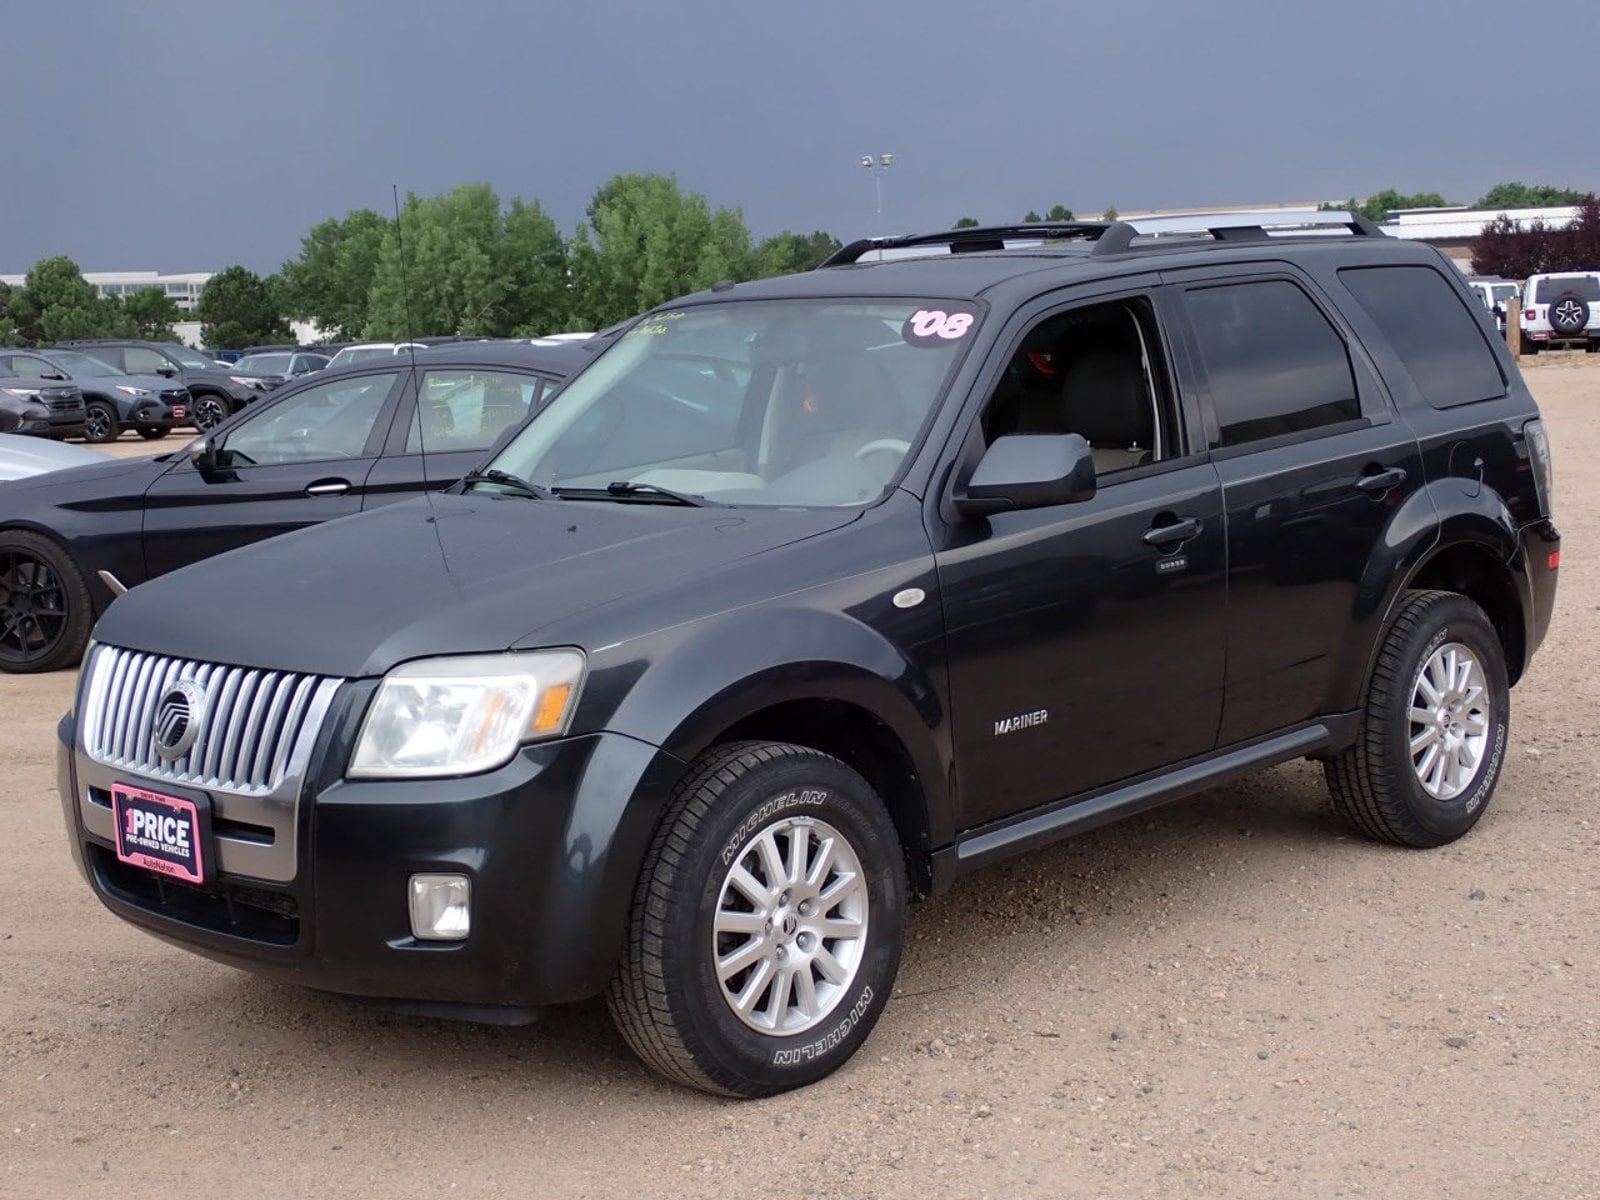 Used 2008 Mercury Mariner Premier with VIN 4M2CU97118KJ47460 for sale in Centennial, CO